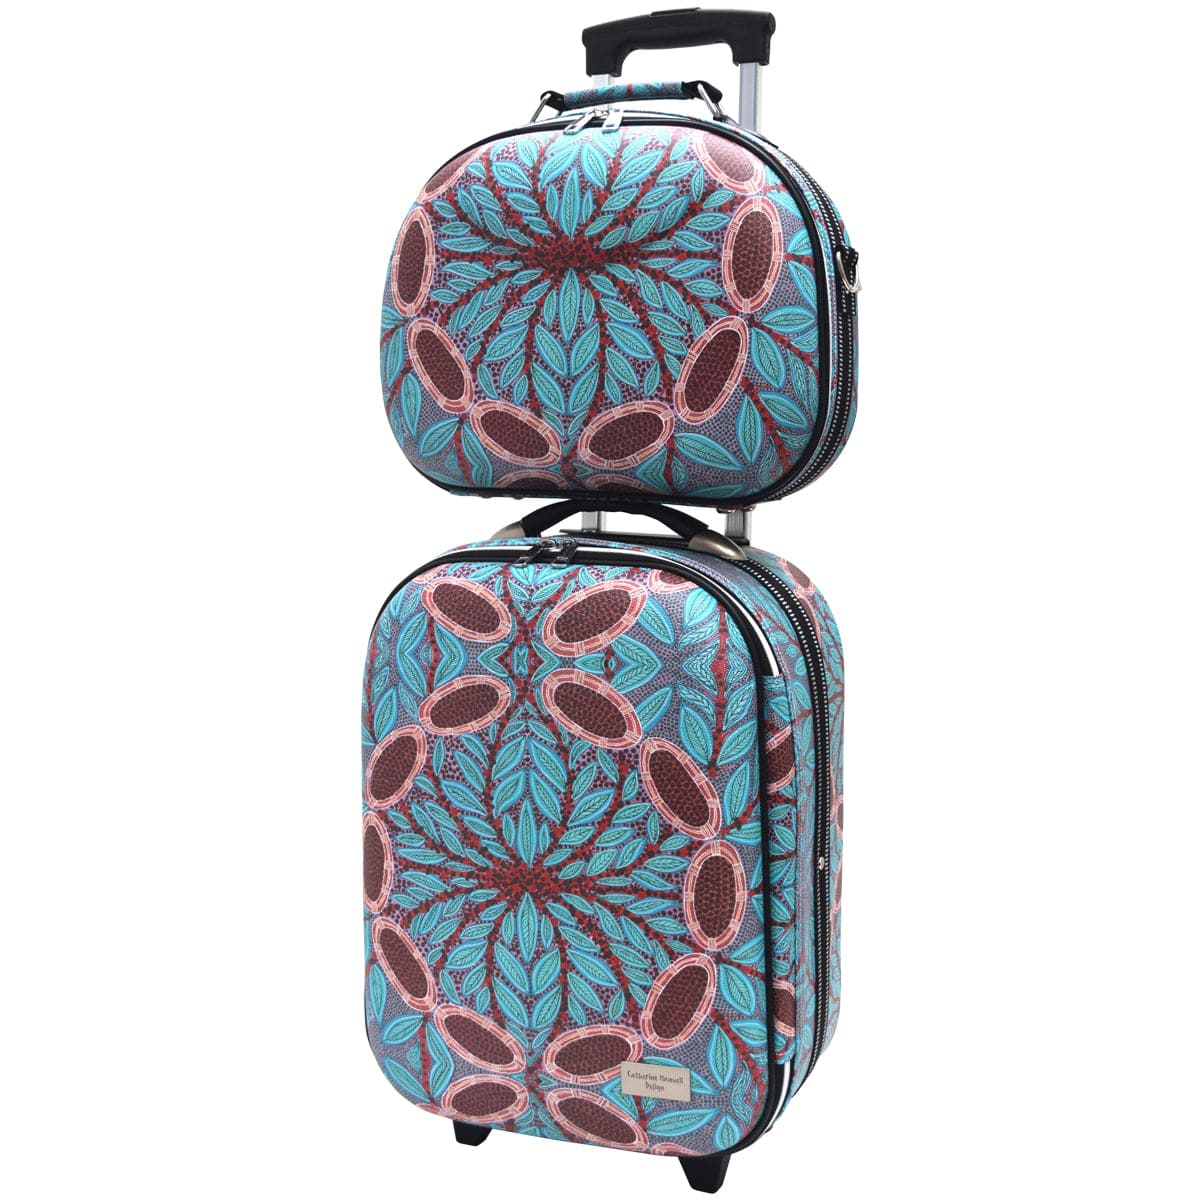 Conkerberry Airport Trolley by Catherine Manuell Designs